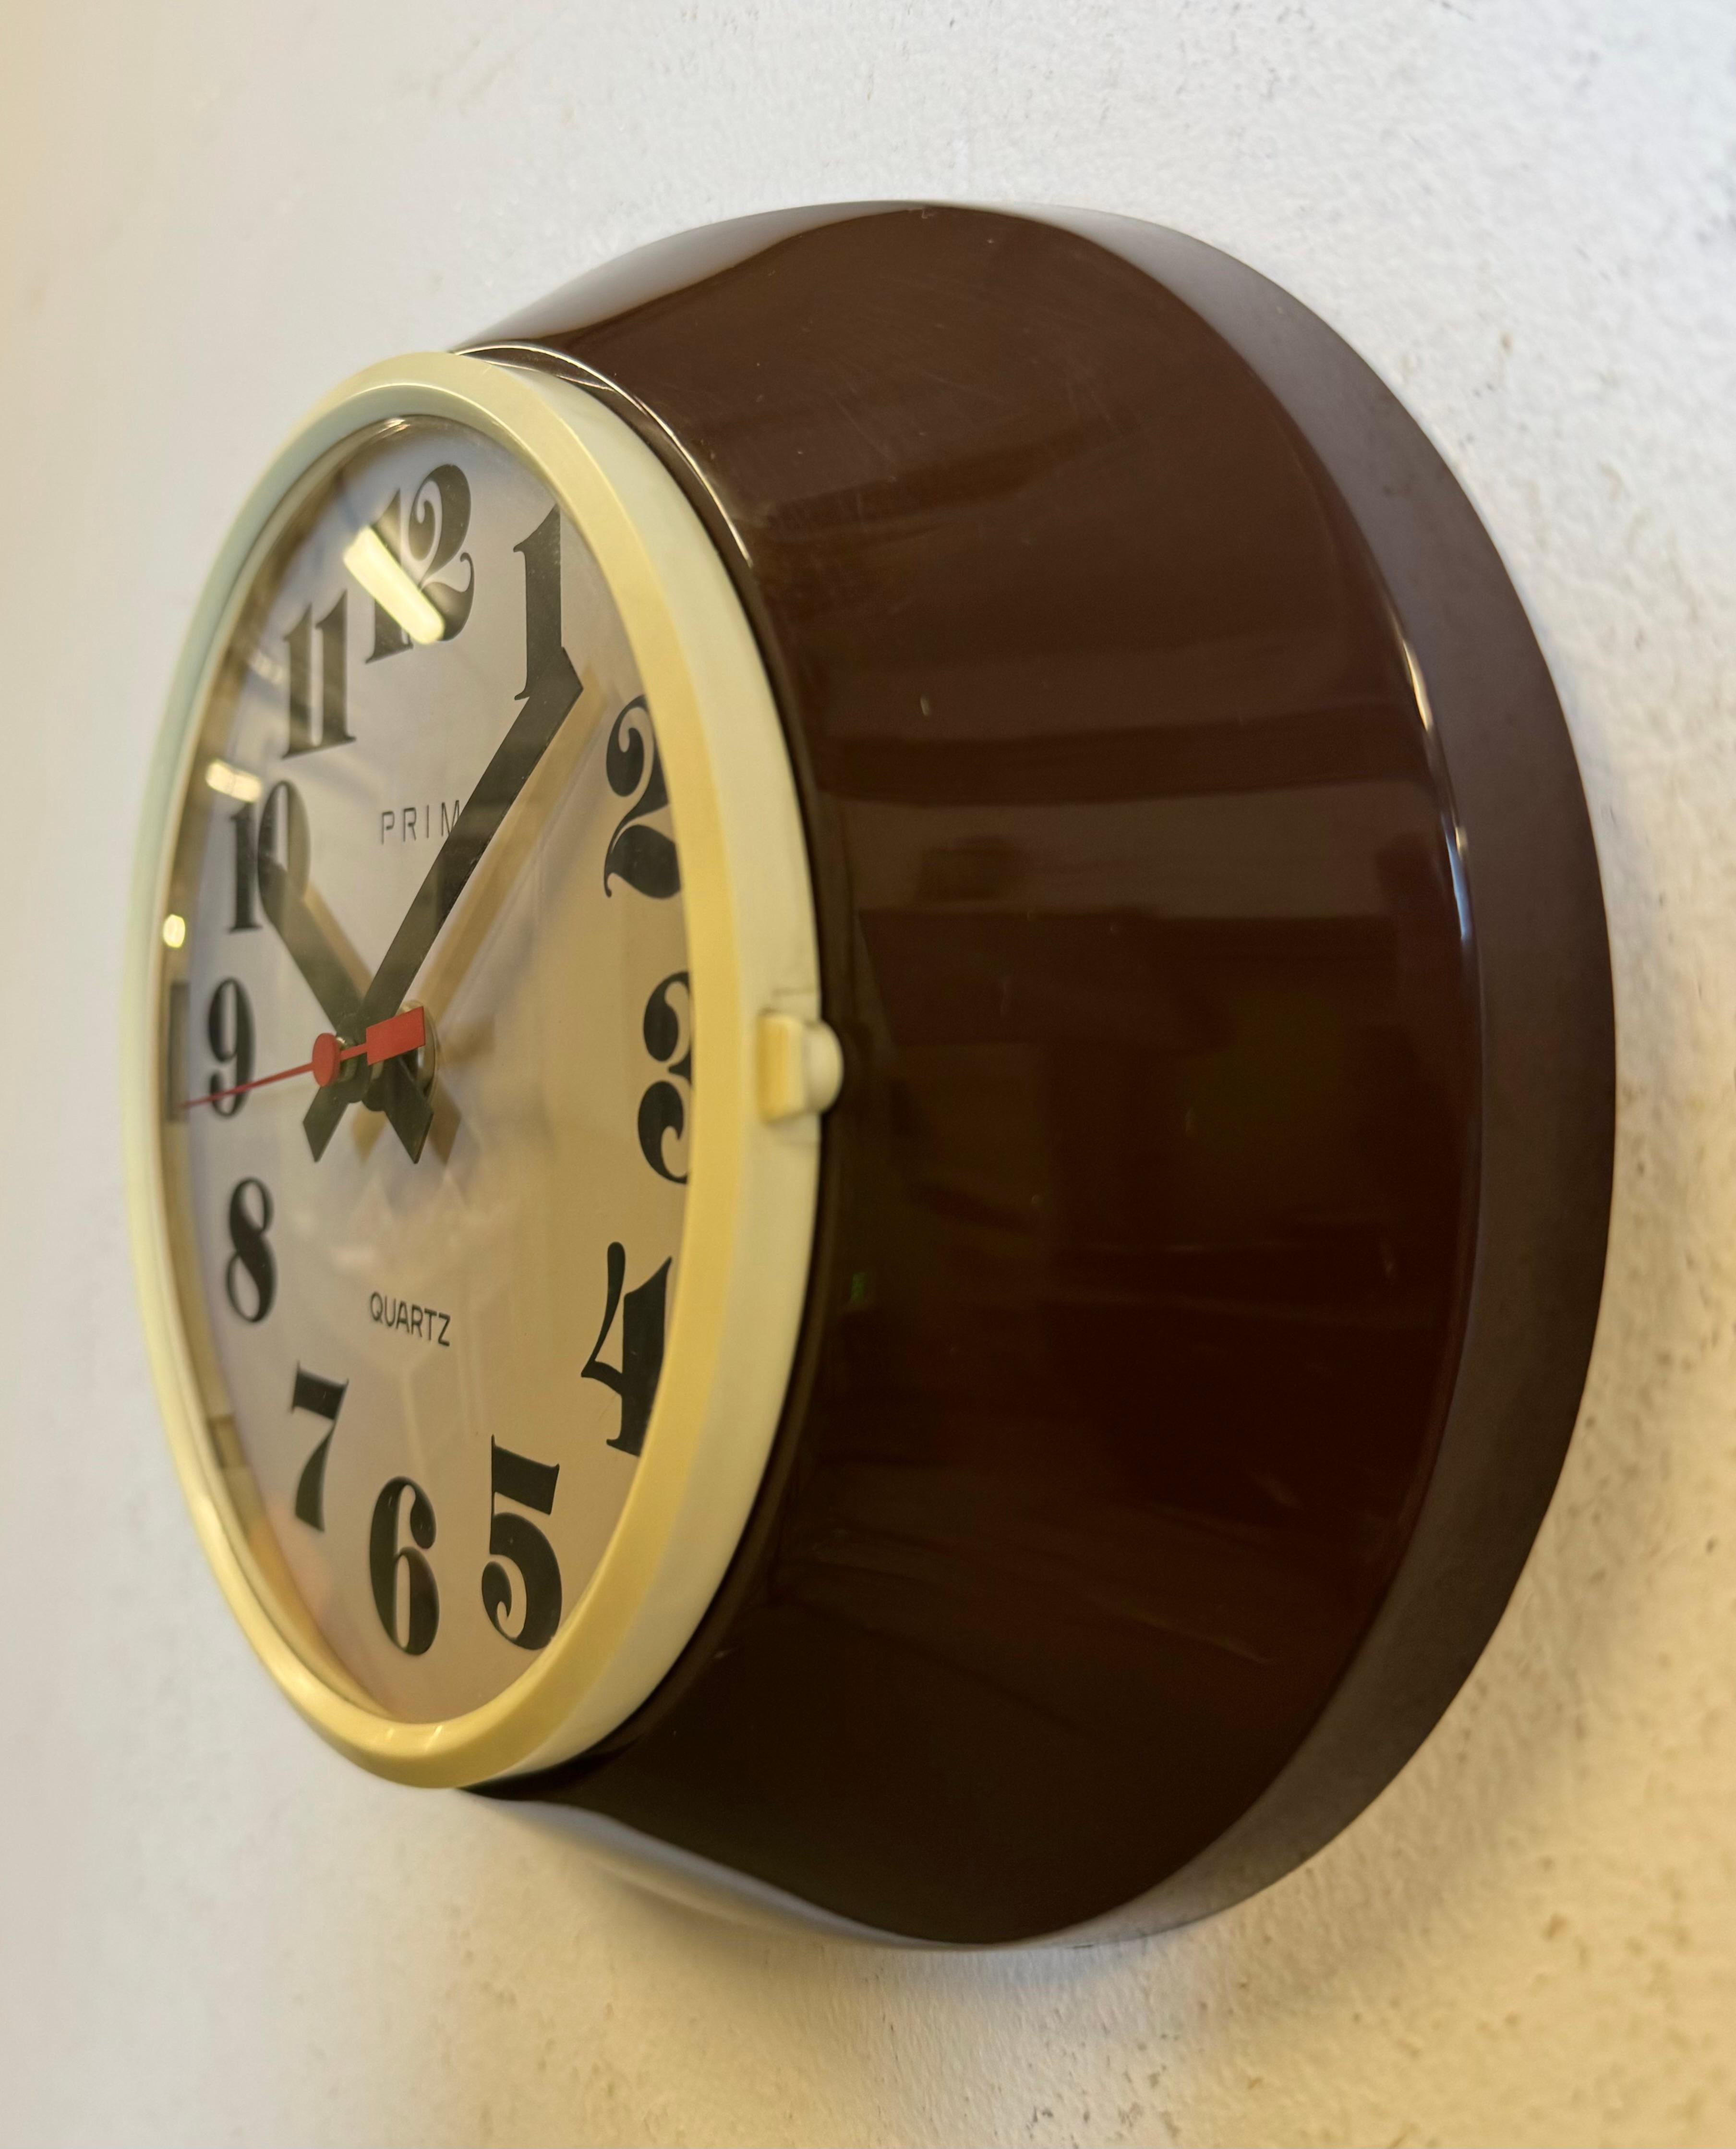 Vintage Brown Bakelite Wall Clock from Prim, 1970s In Good Condition For Sale In Kojetice, CZ